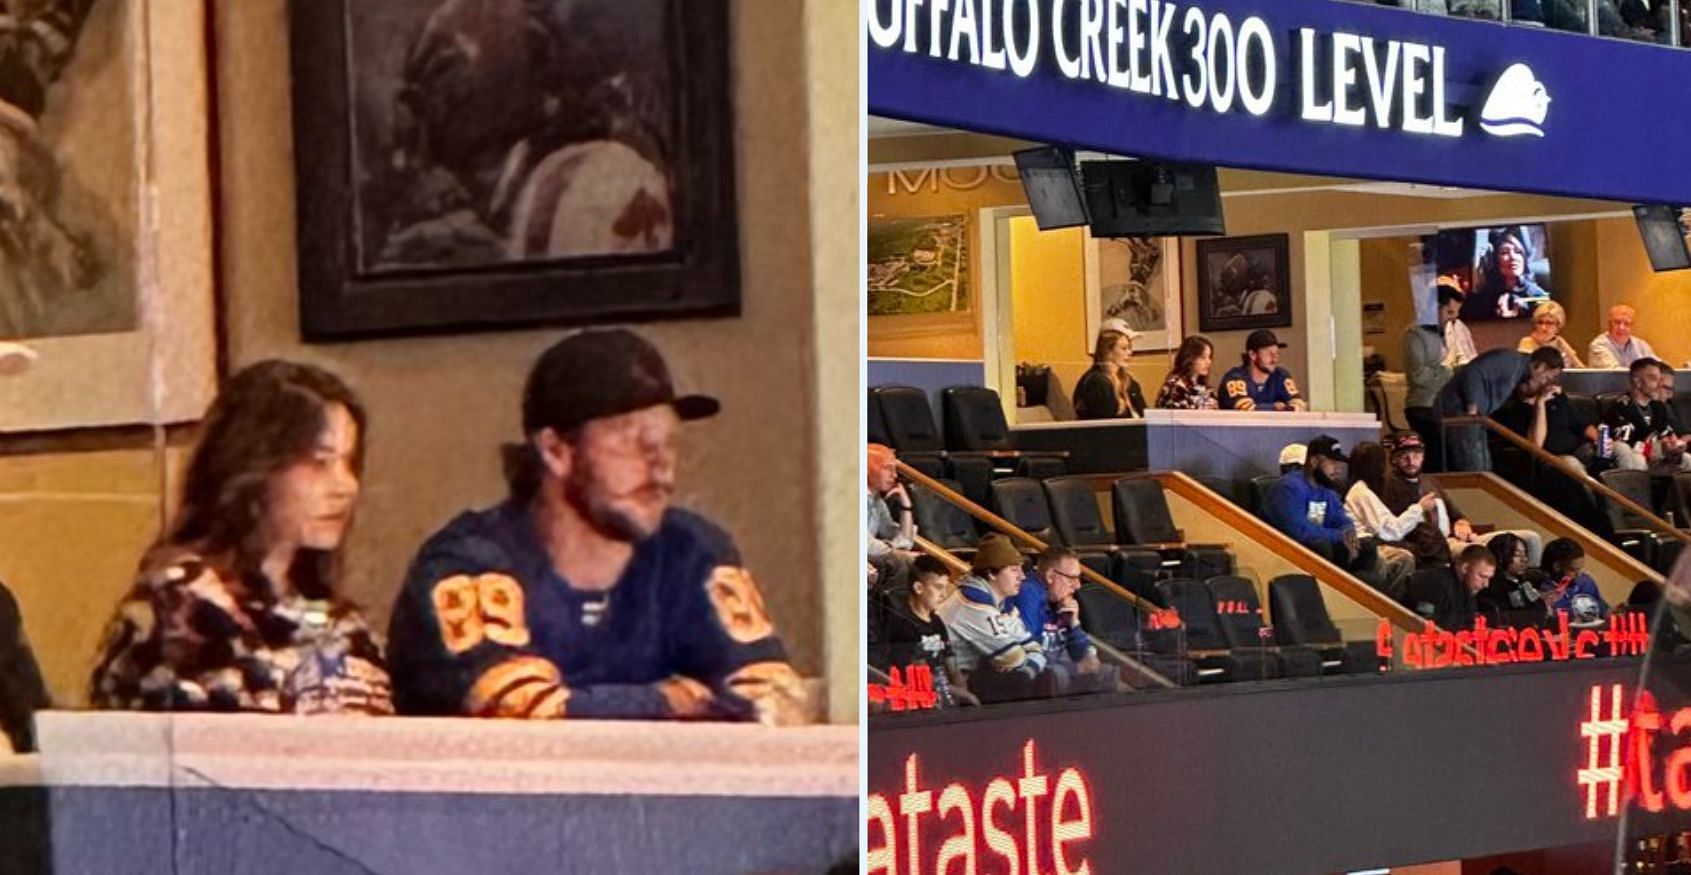 Hailee Steinfeld and Josh Allen go public with first appearance together at Buffalo Sabres game